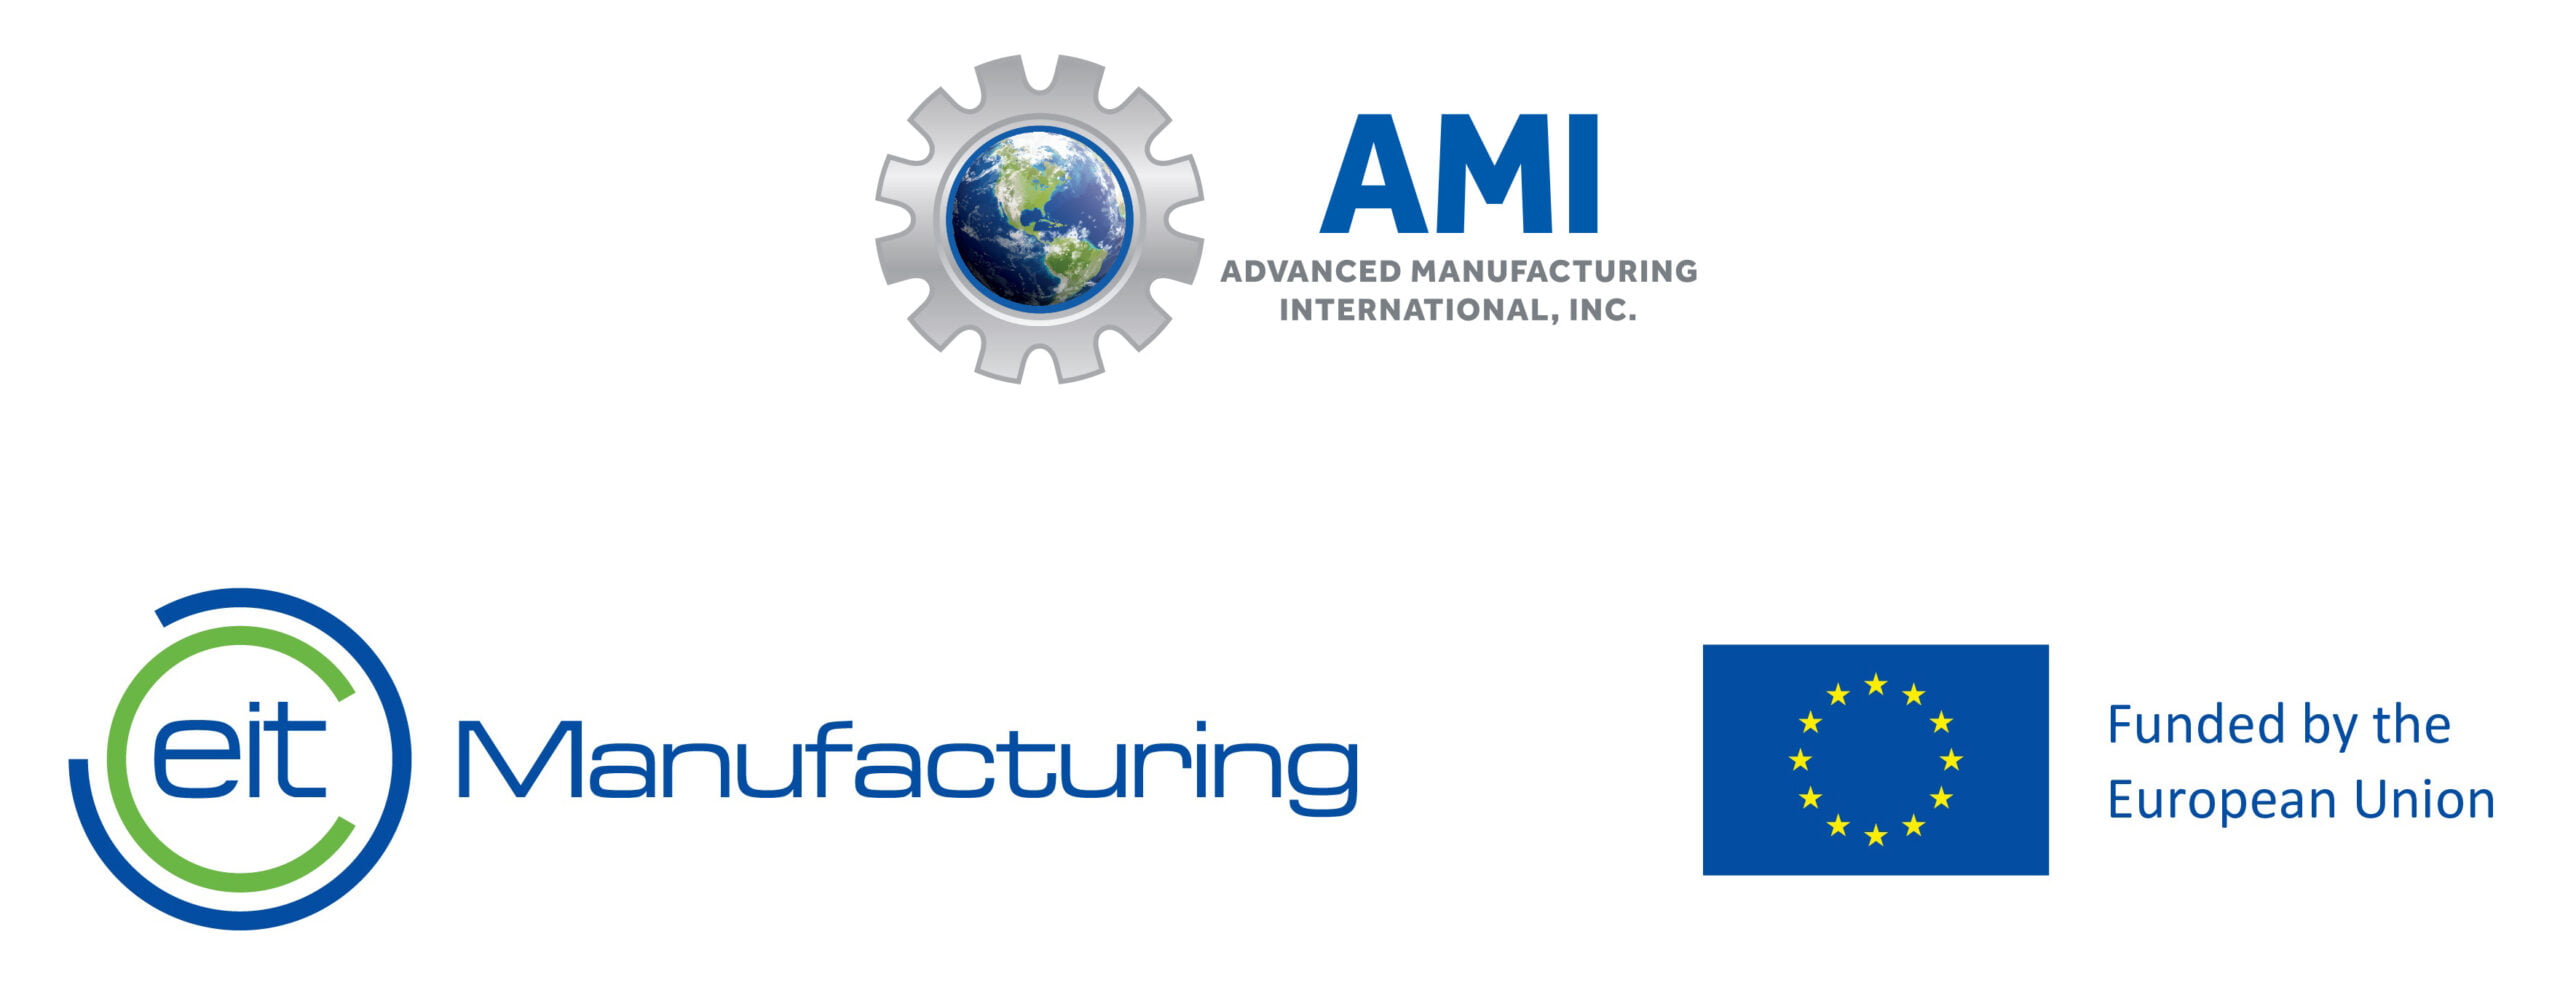 AMI Announces Partnership With EIT Manufacturing